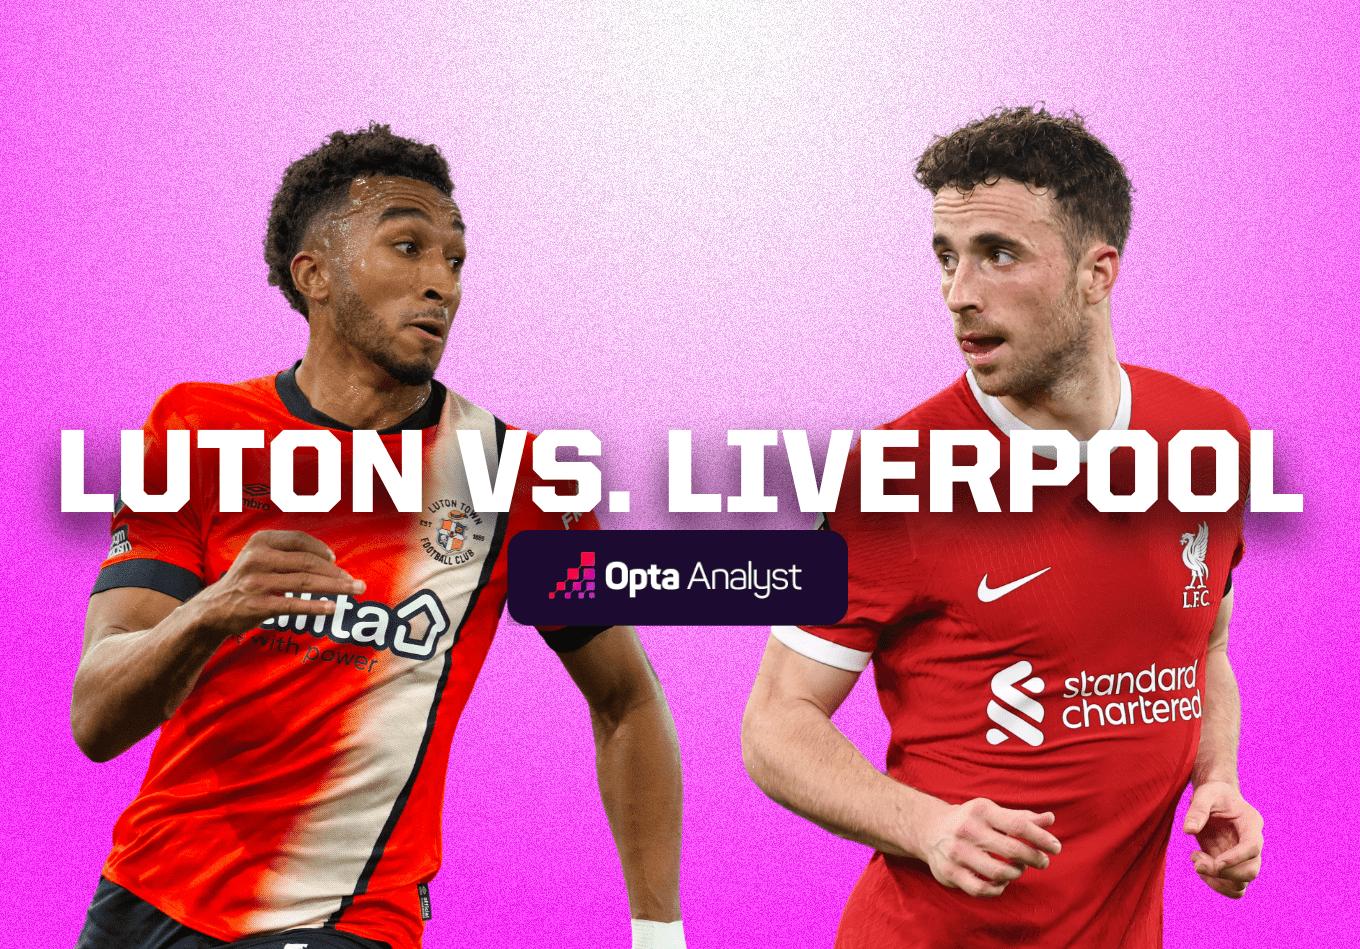 Luton Town vs Liverpool: Prediction and Preview